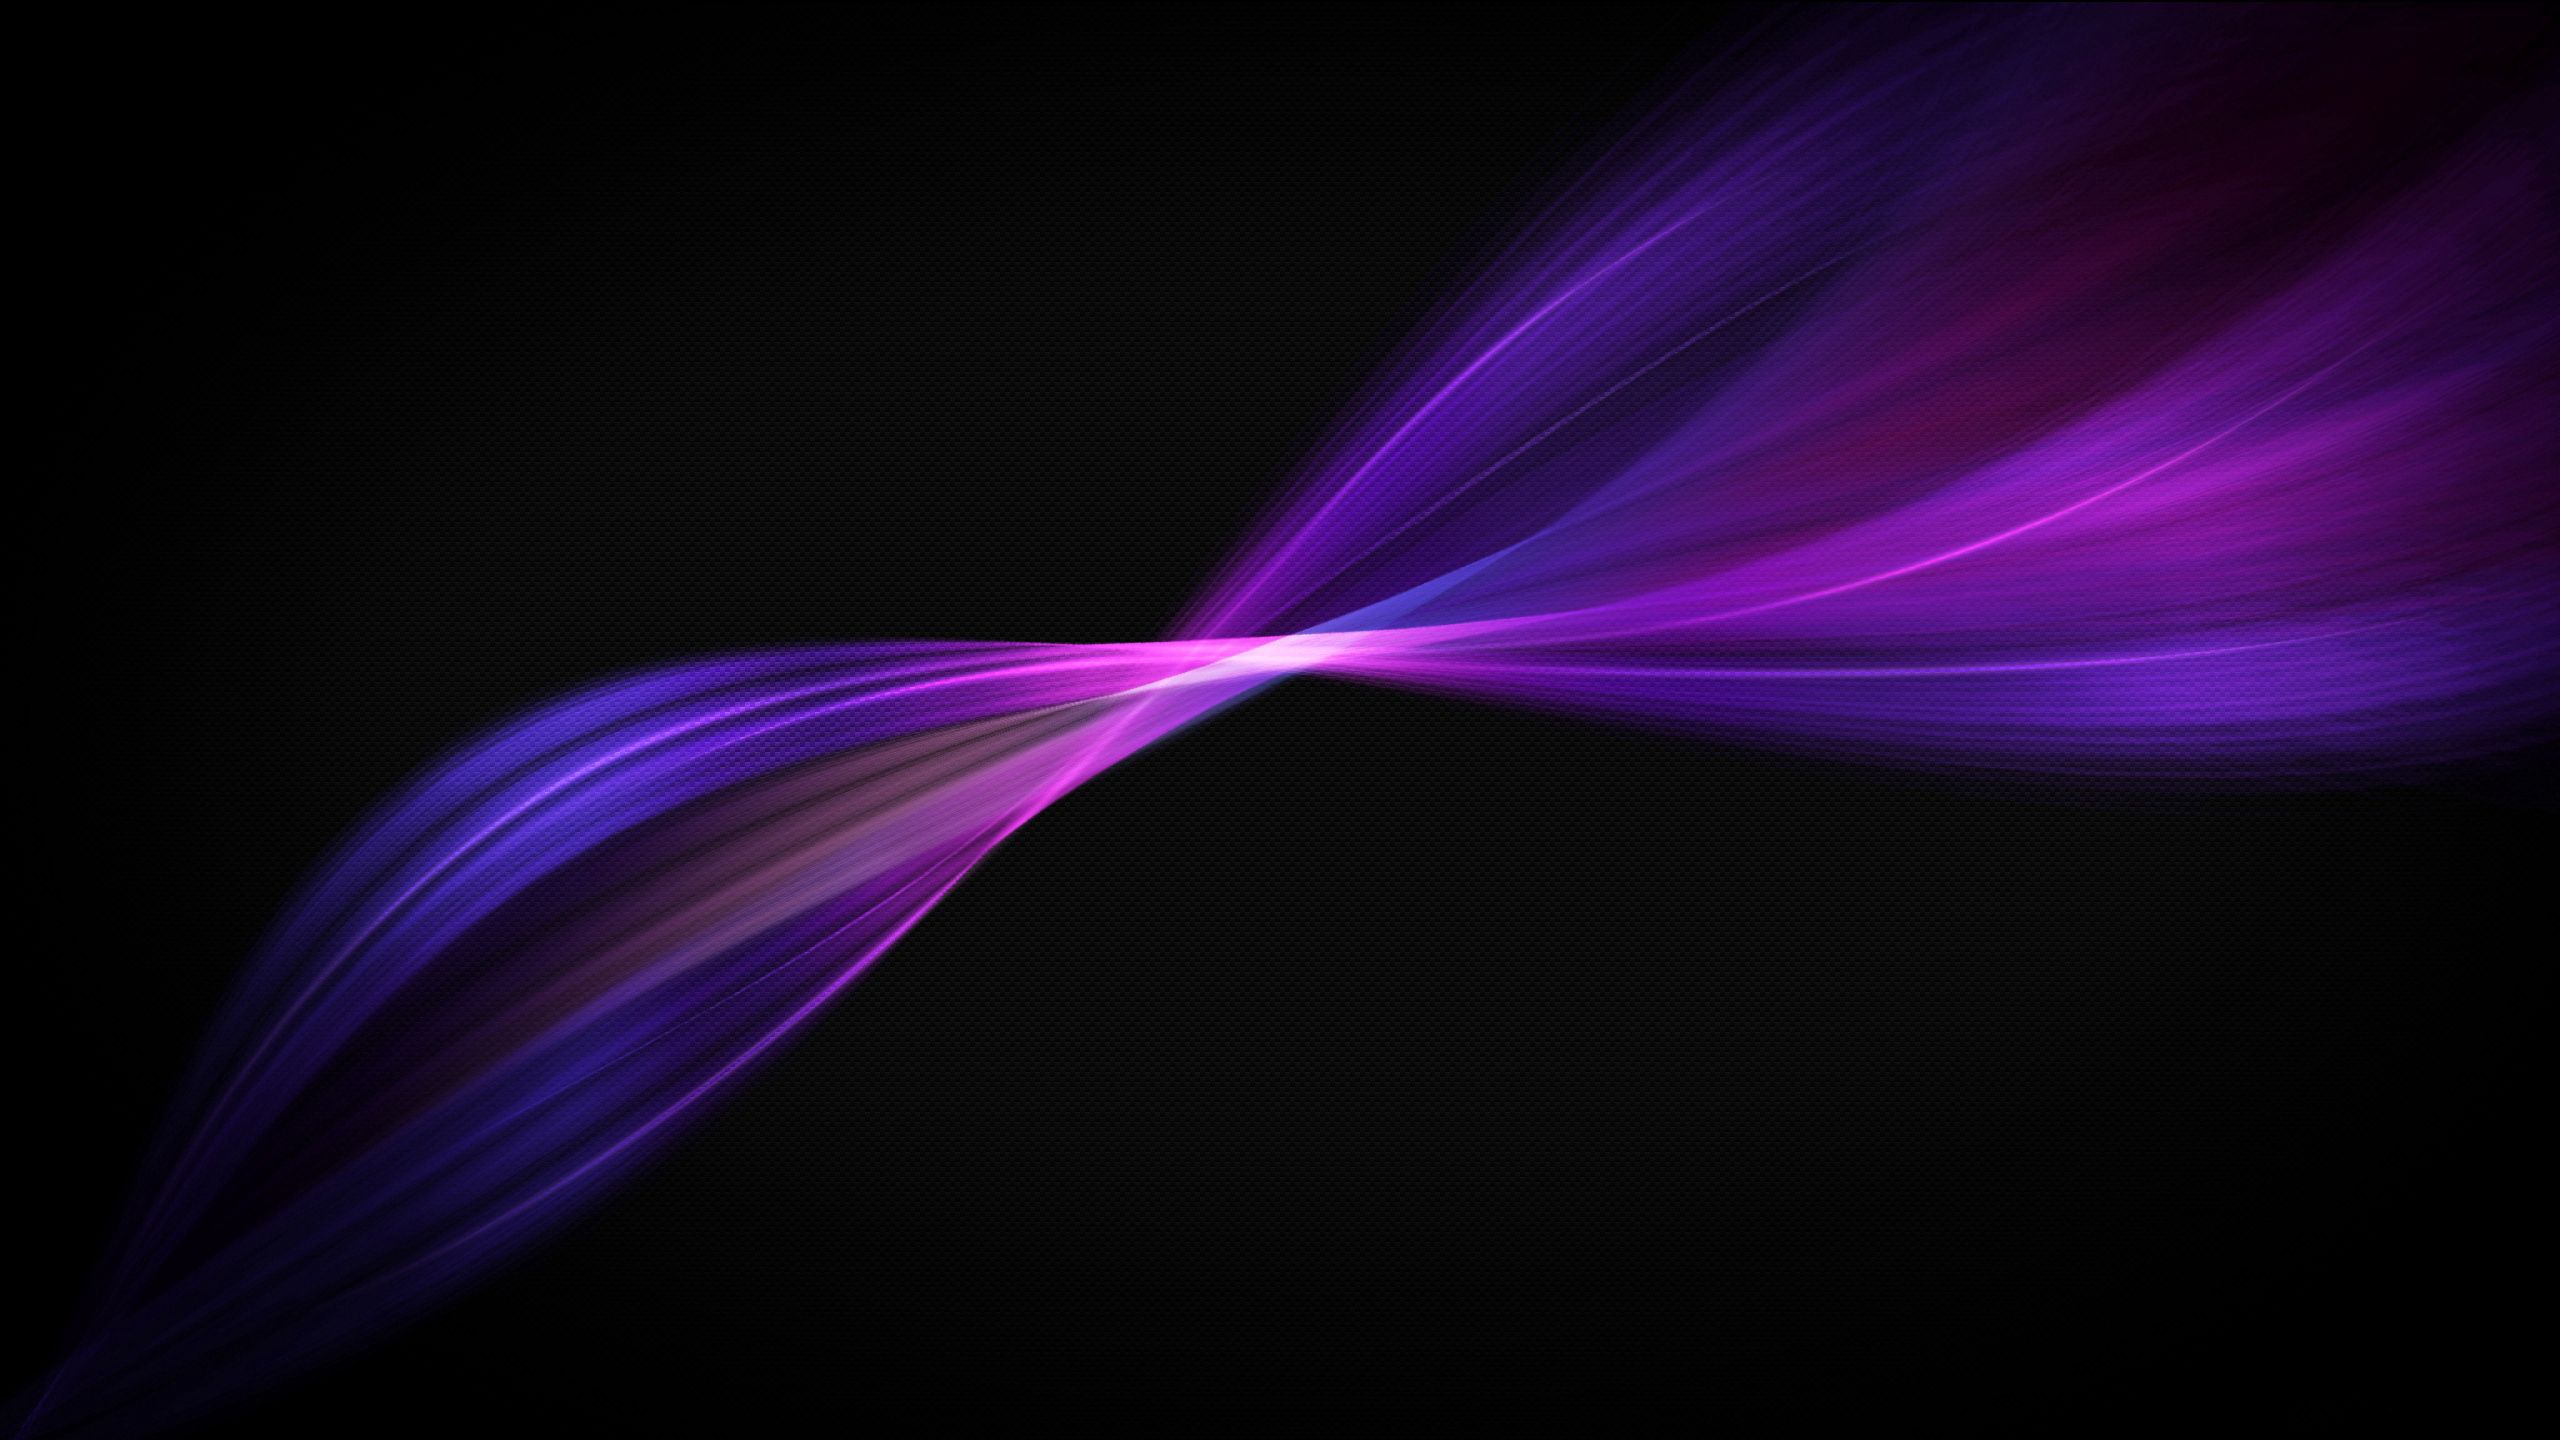 graphics, color, background, purple, black, abstract, violet, lines